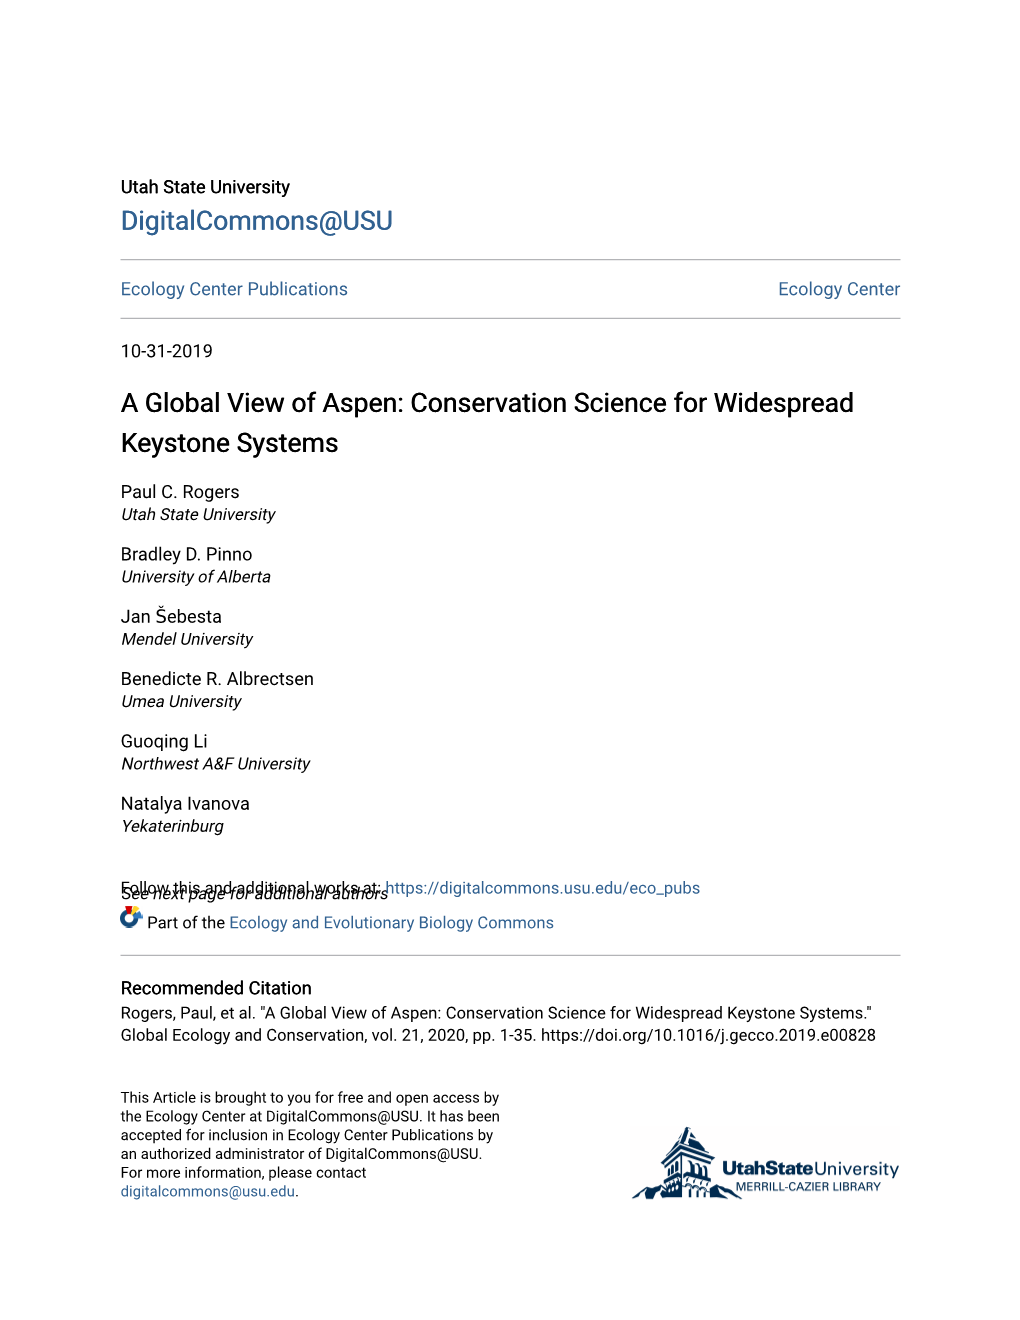 A Global View of Aspen: Conservation Science for Widespread Keystone Systems